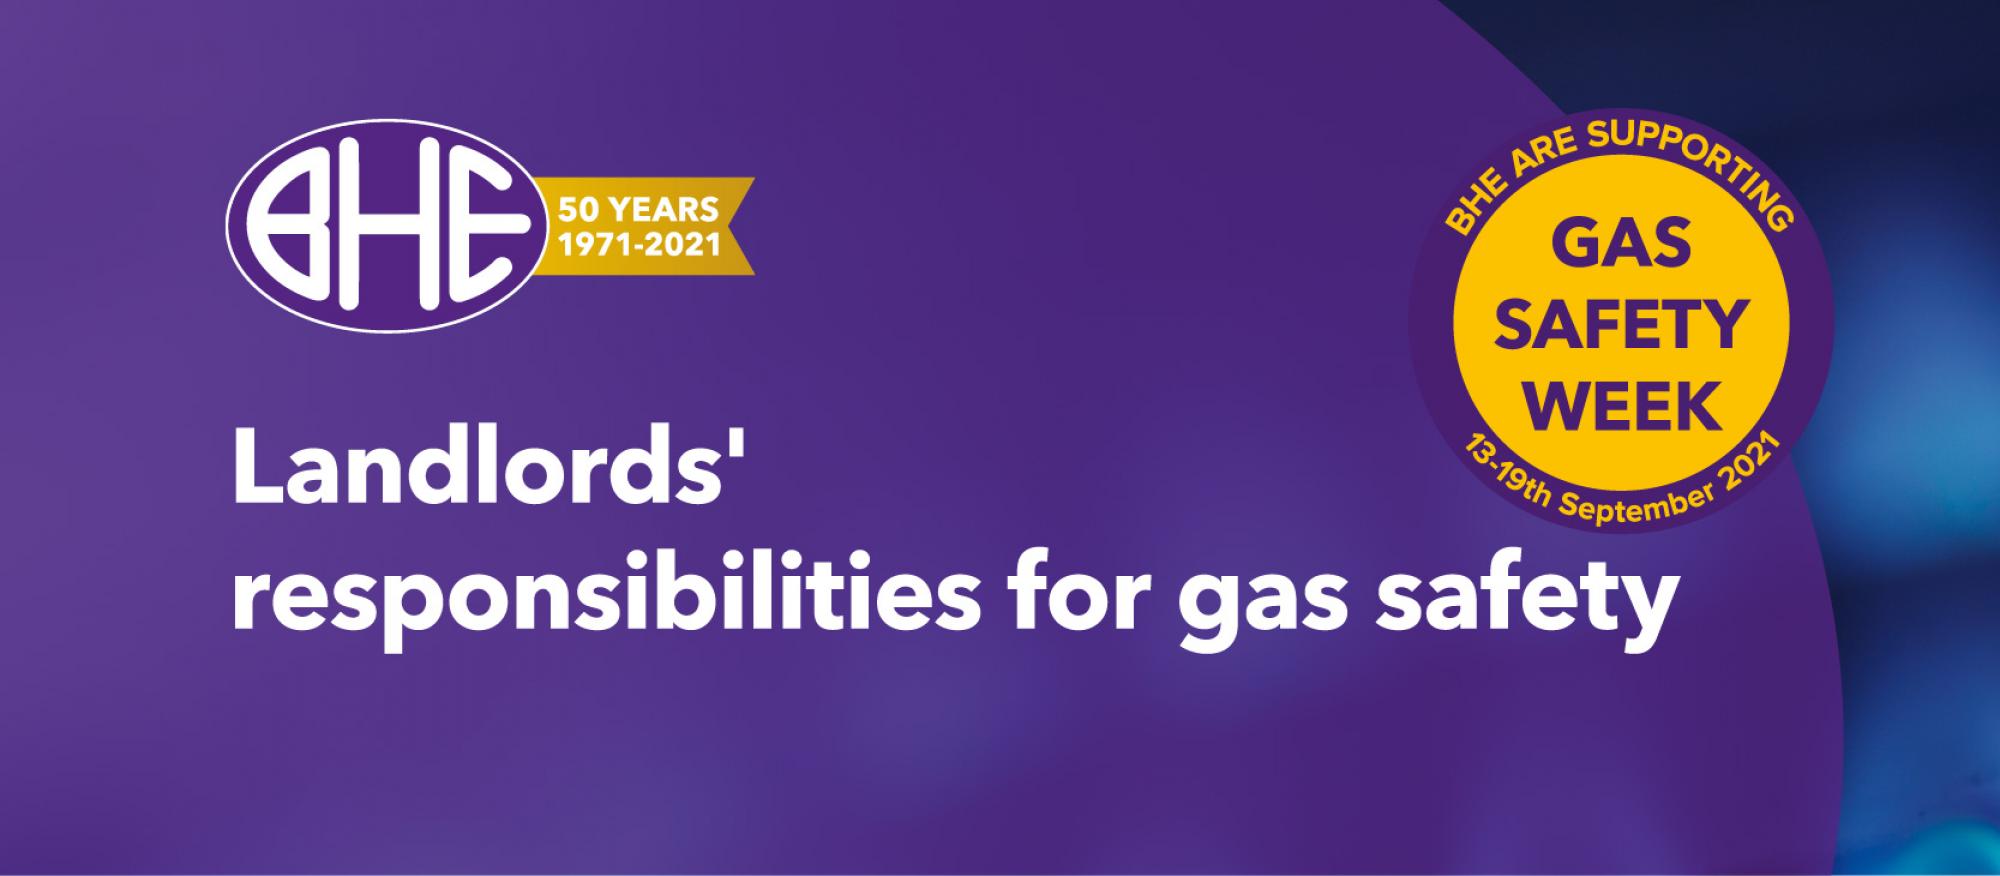 Landlords' legal responsibilities during Gas Safety Week 2021: staying gas safe with BHE Services